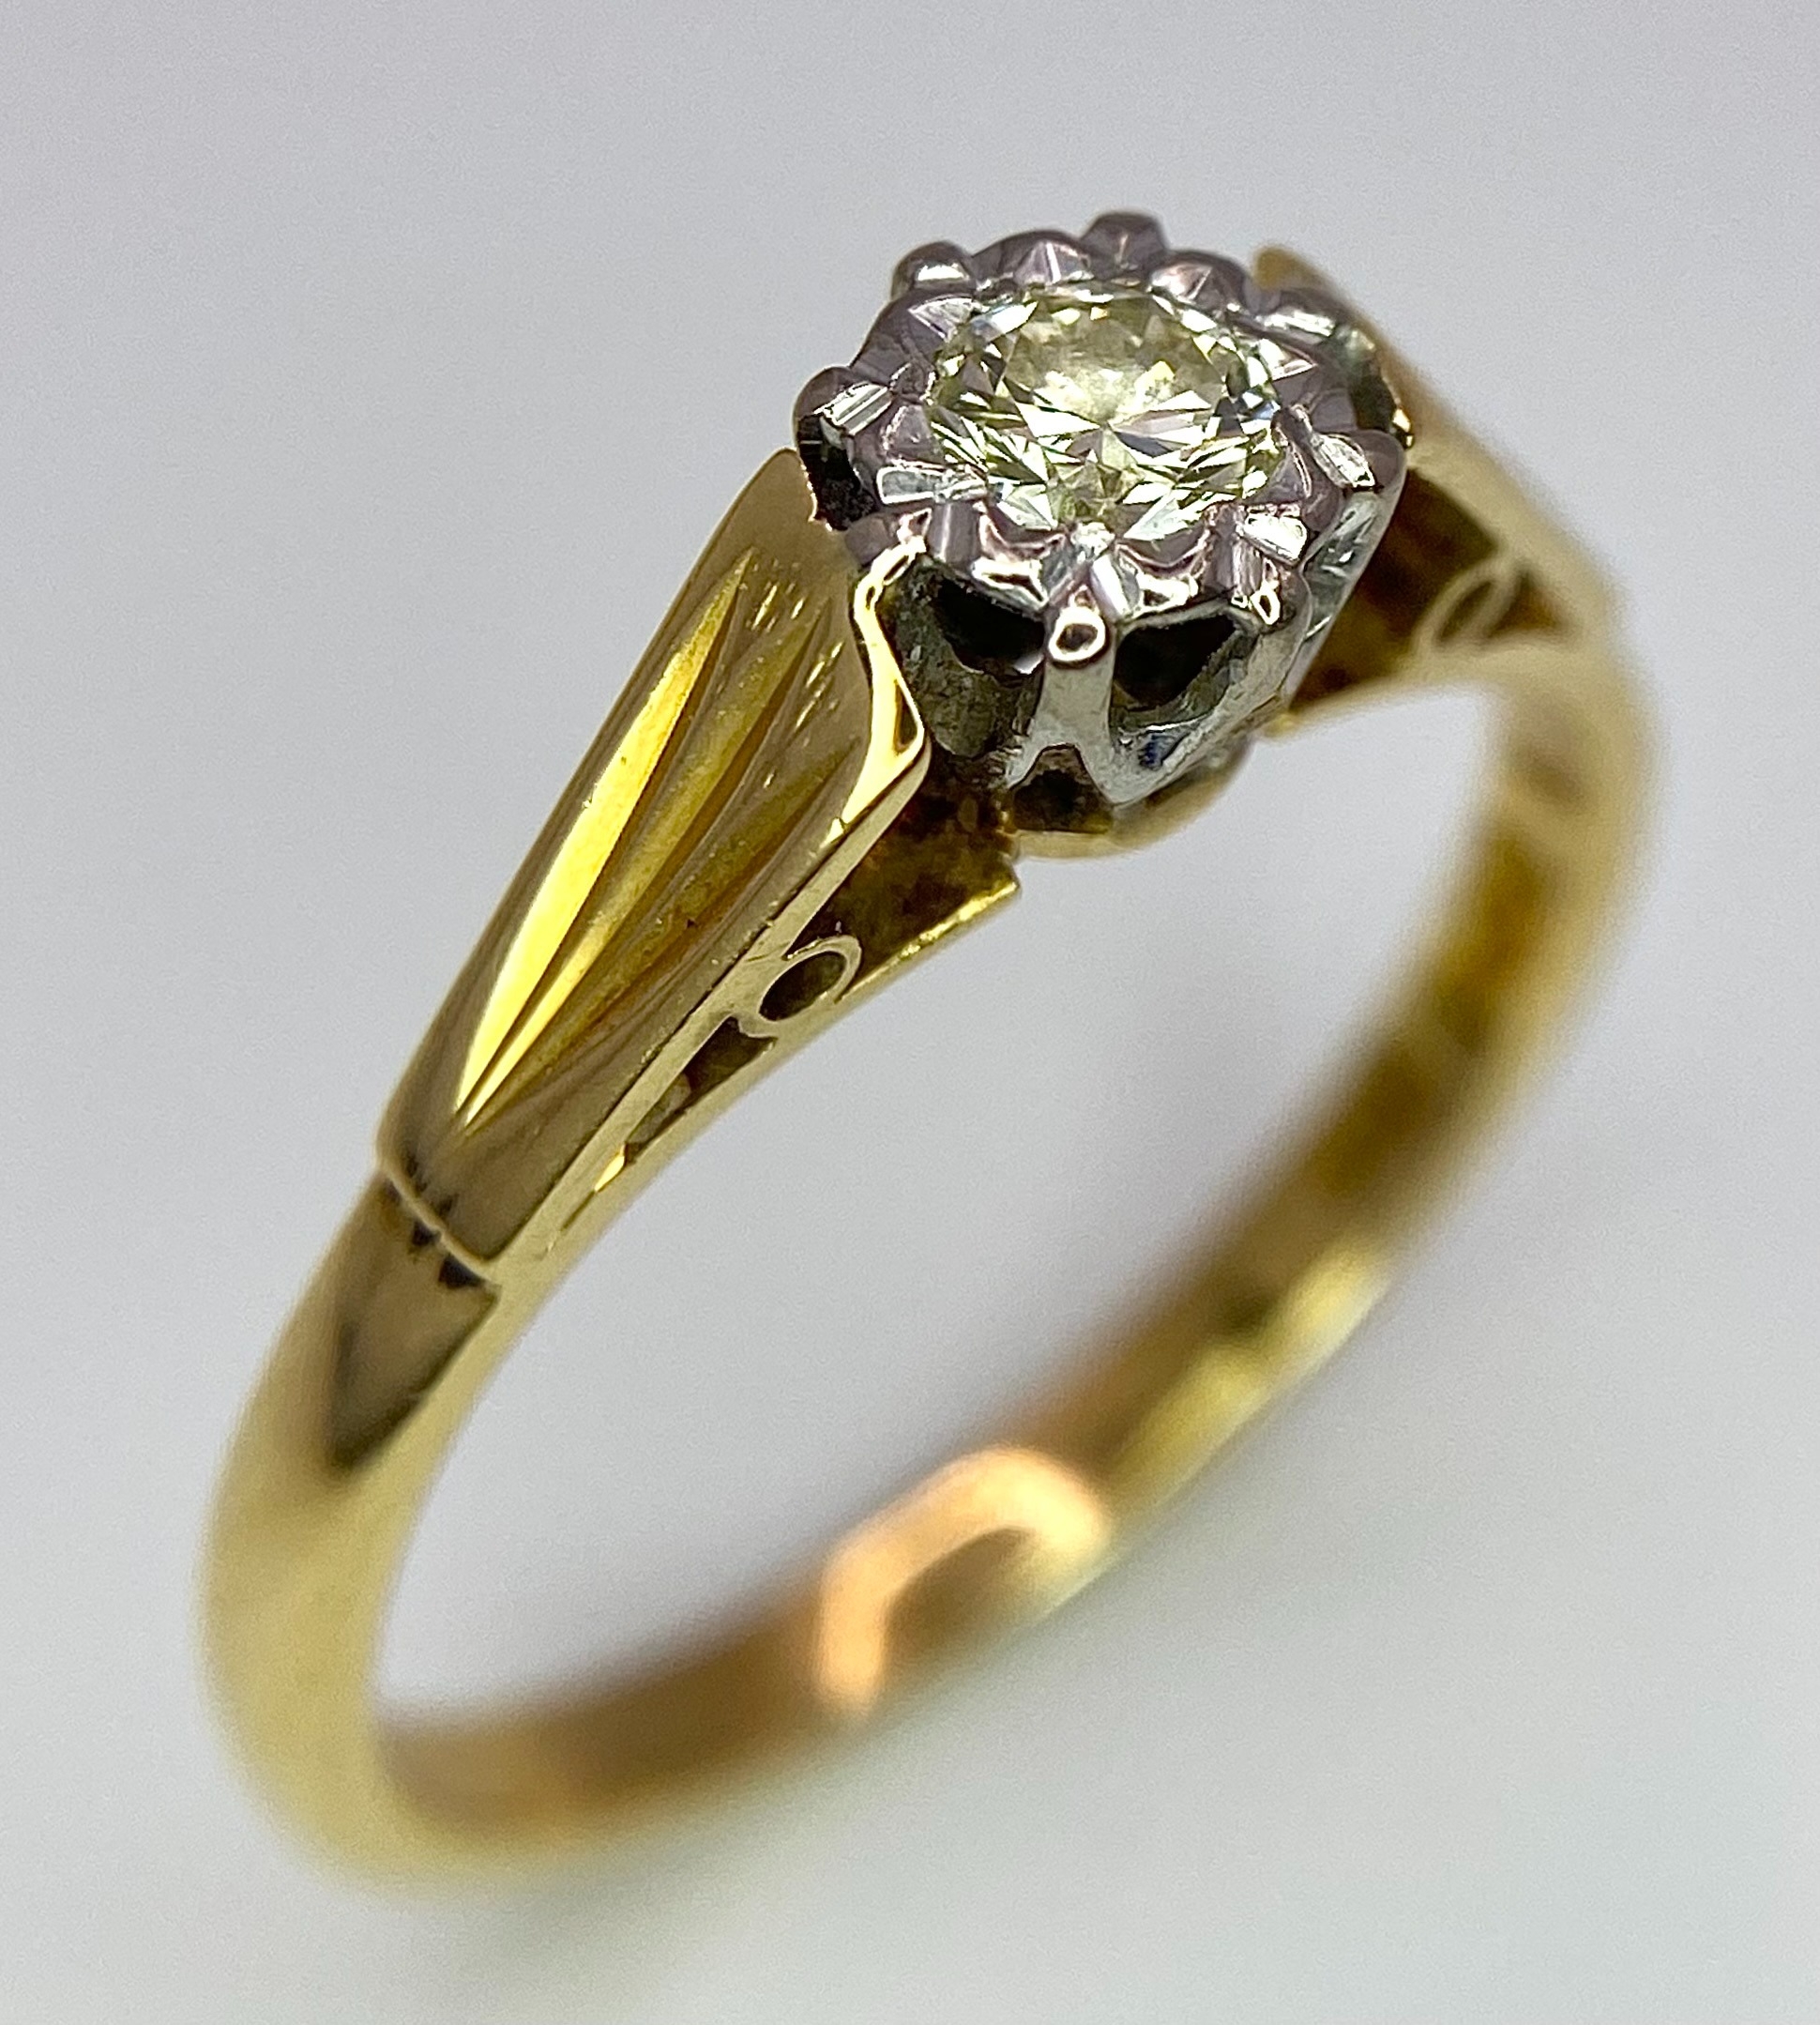 A VINTAGE 18K YELLOW GOLD DIAMOND SOLITAIRE RING. 0.15CT. 2.6G. SIZE L 1/2.